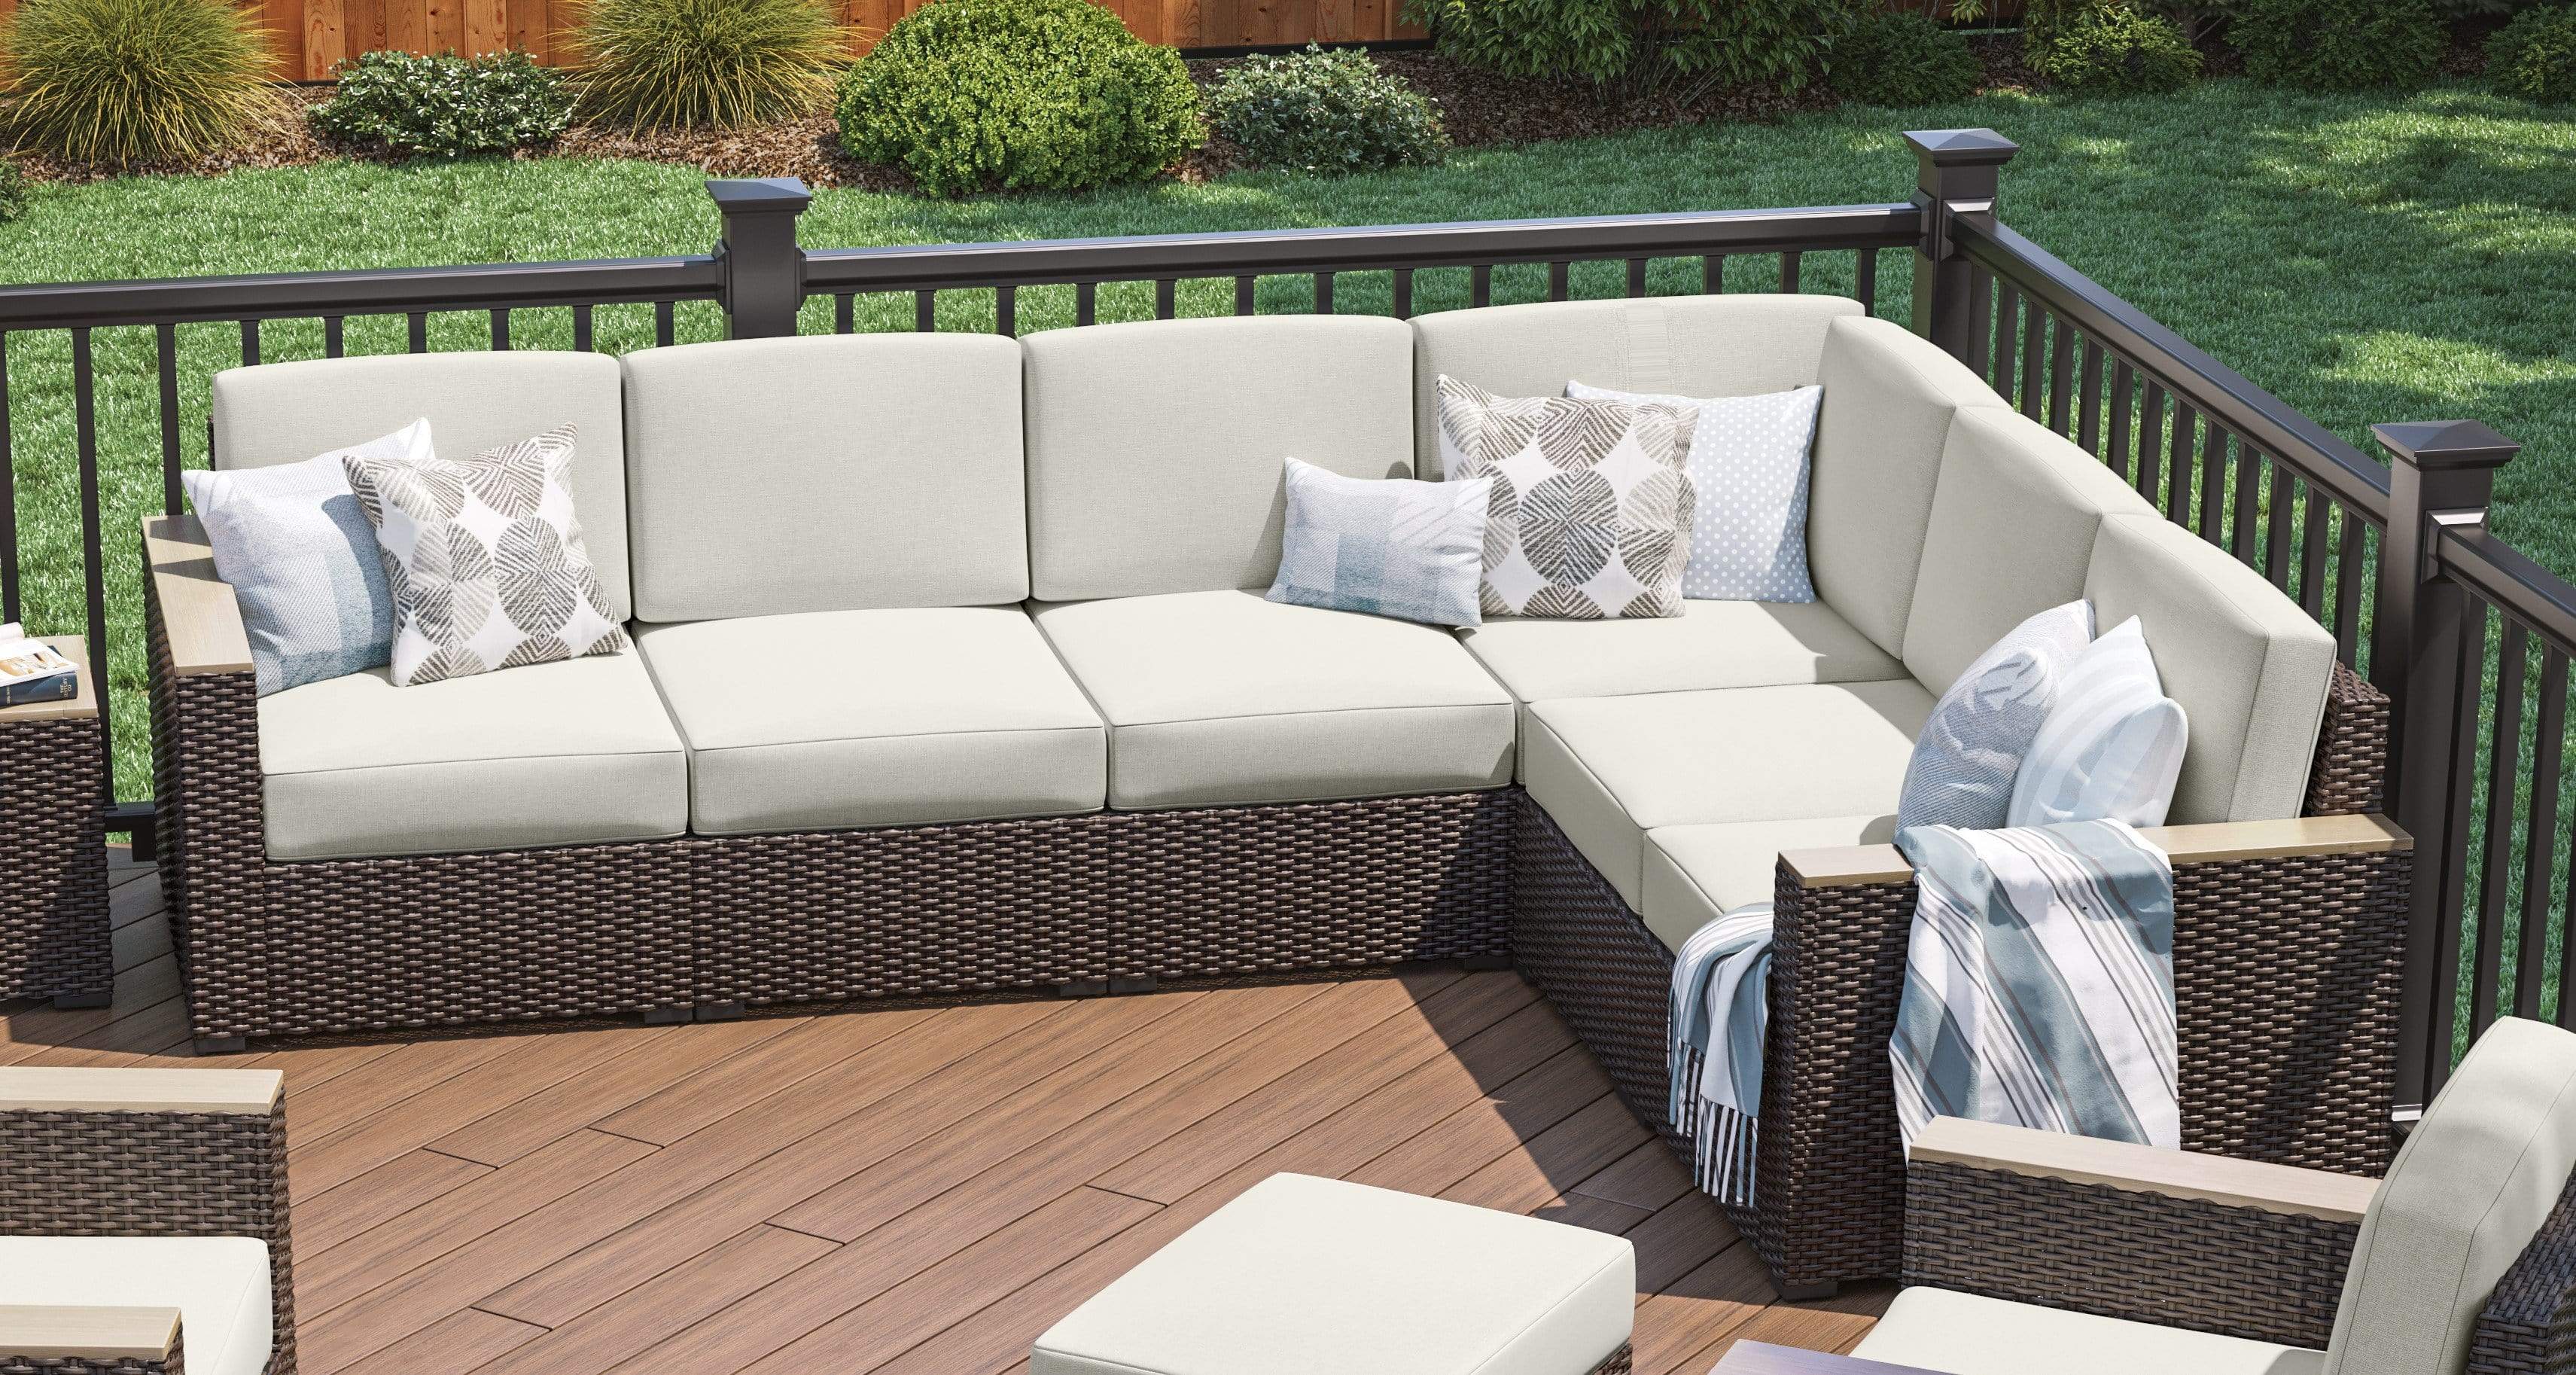 Homestyles Outdoor Sectional Palm Springs Outdoor 6 Seat Sectional by Homestyles